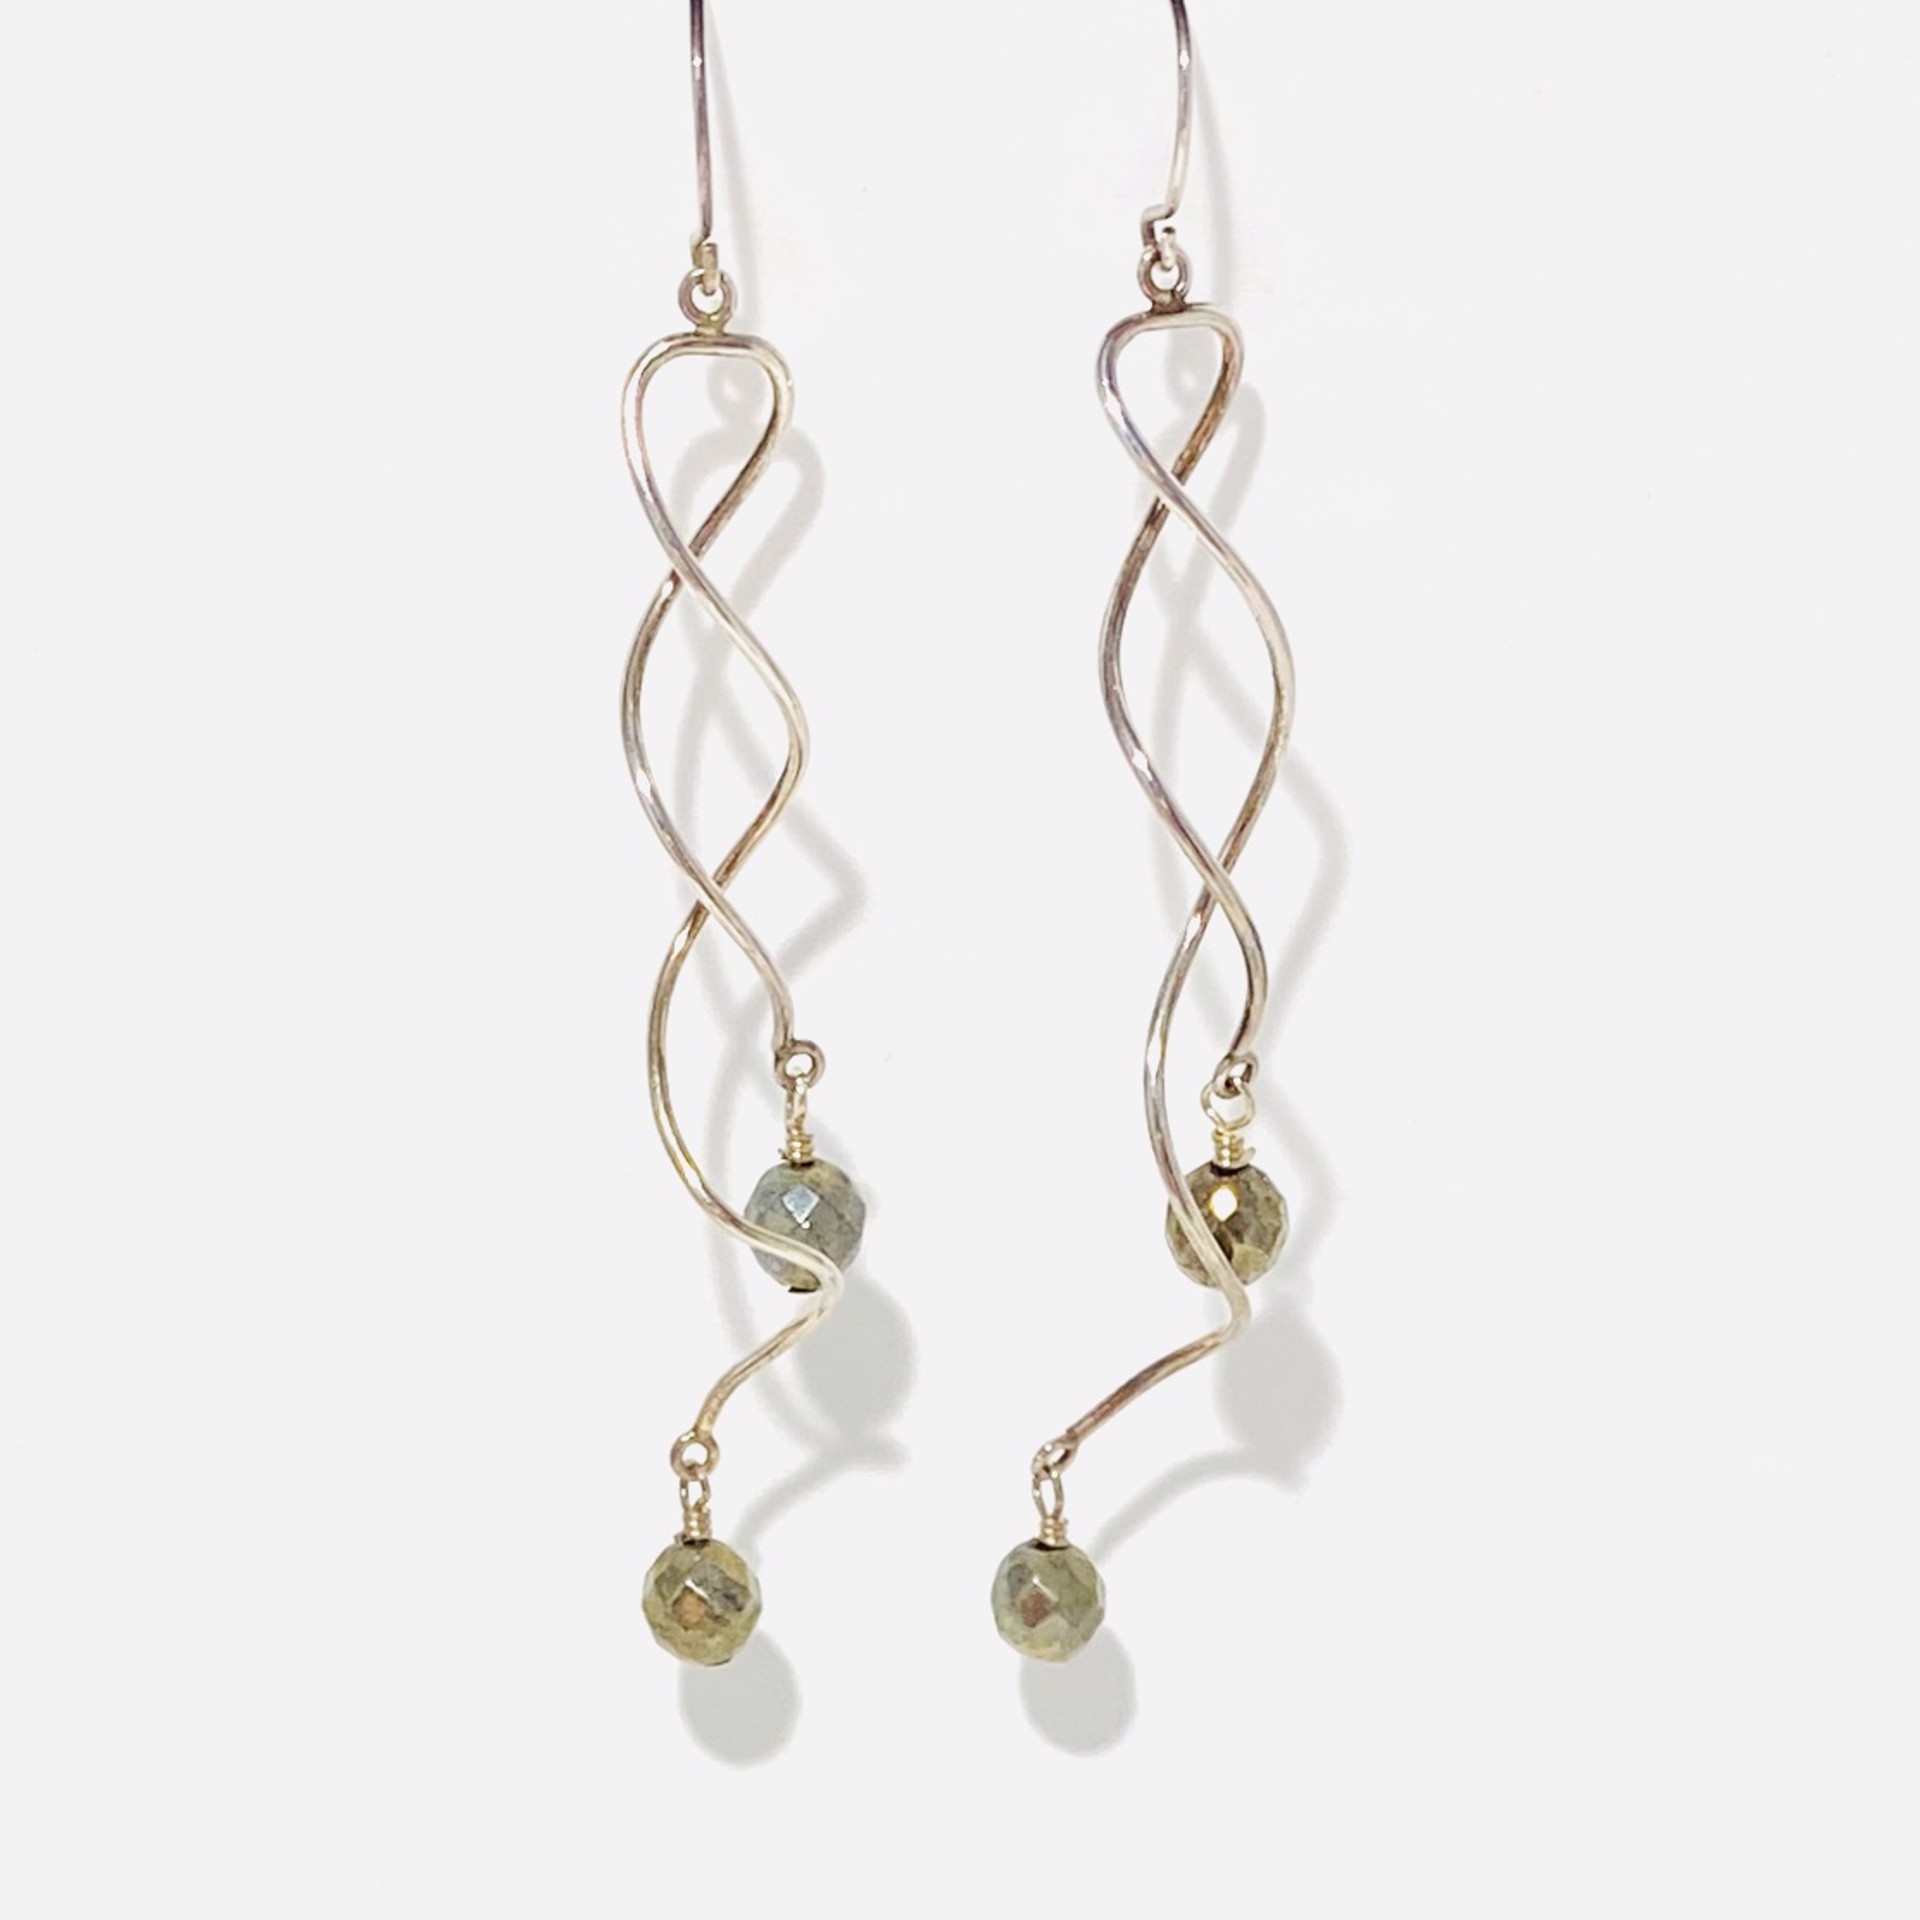 Faceted Pyrite , Twister Sterling Earrings LR23-49 by Legare Riano